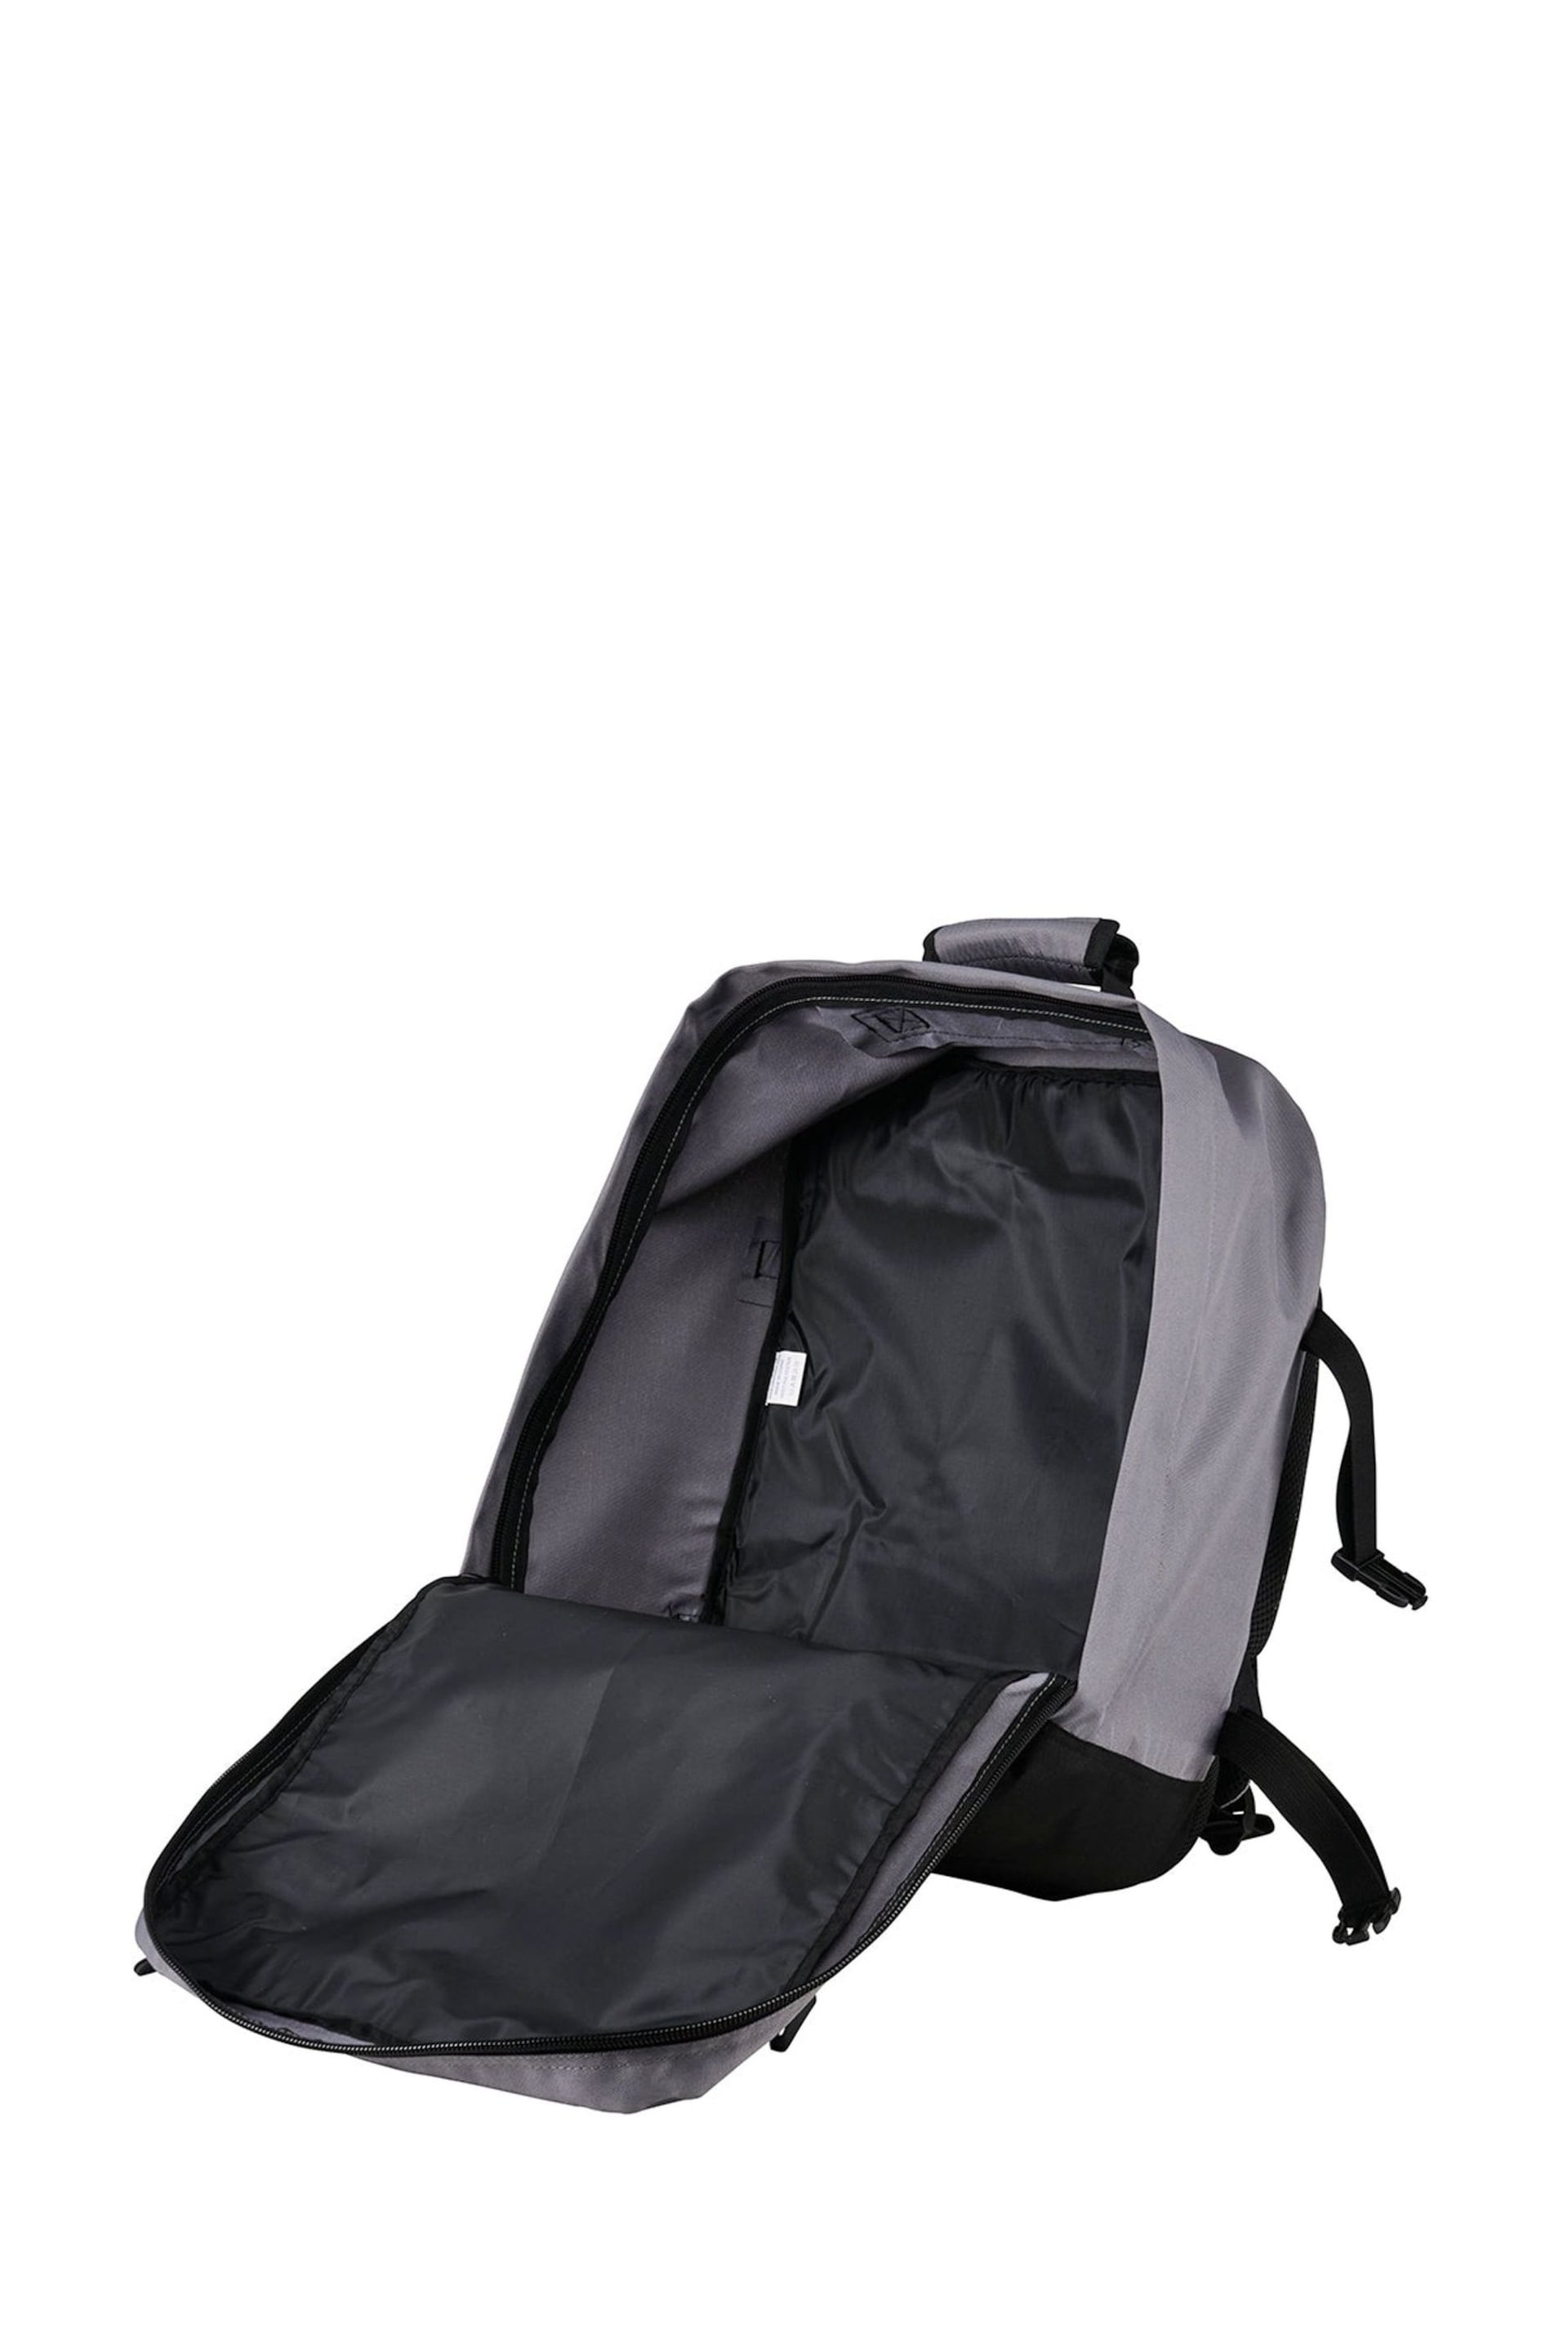 Cabin Max Metz 44L Carry On 55cm Backpack - Image 5 of 5